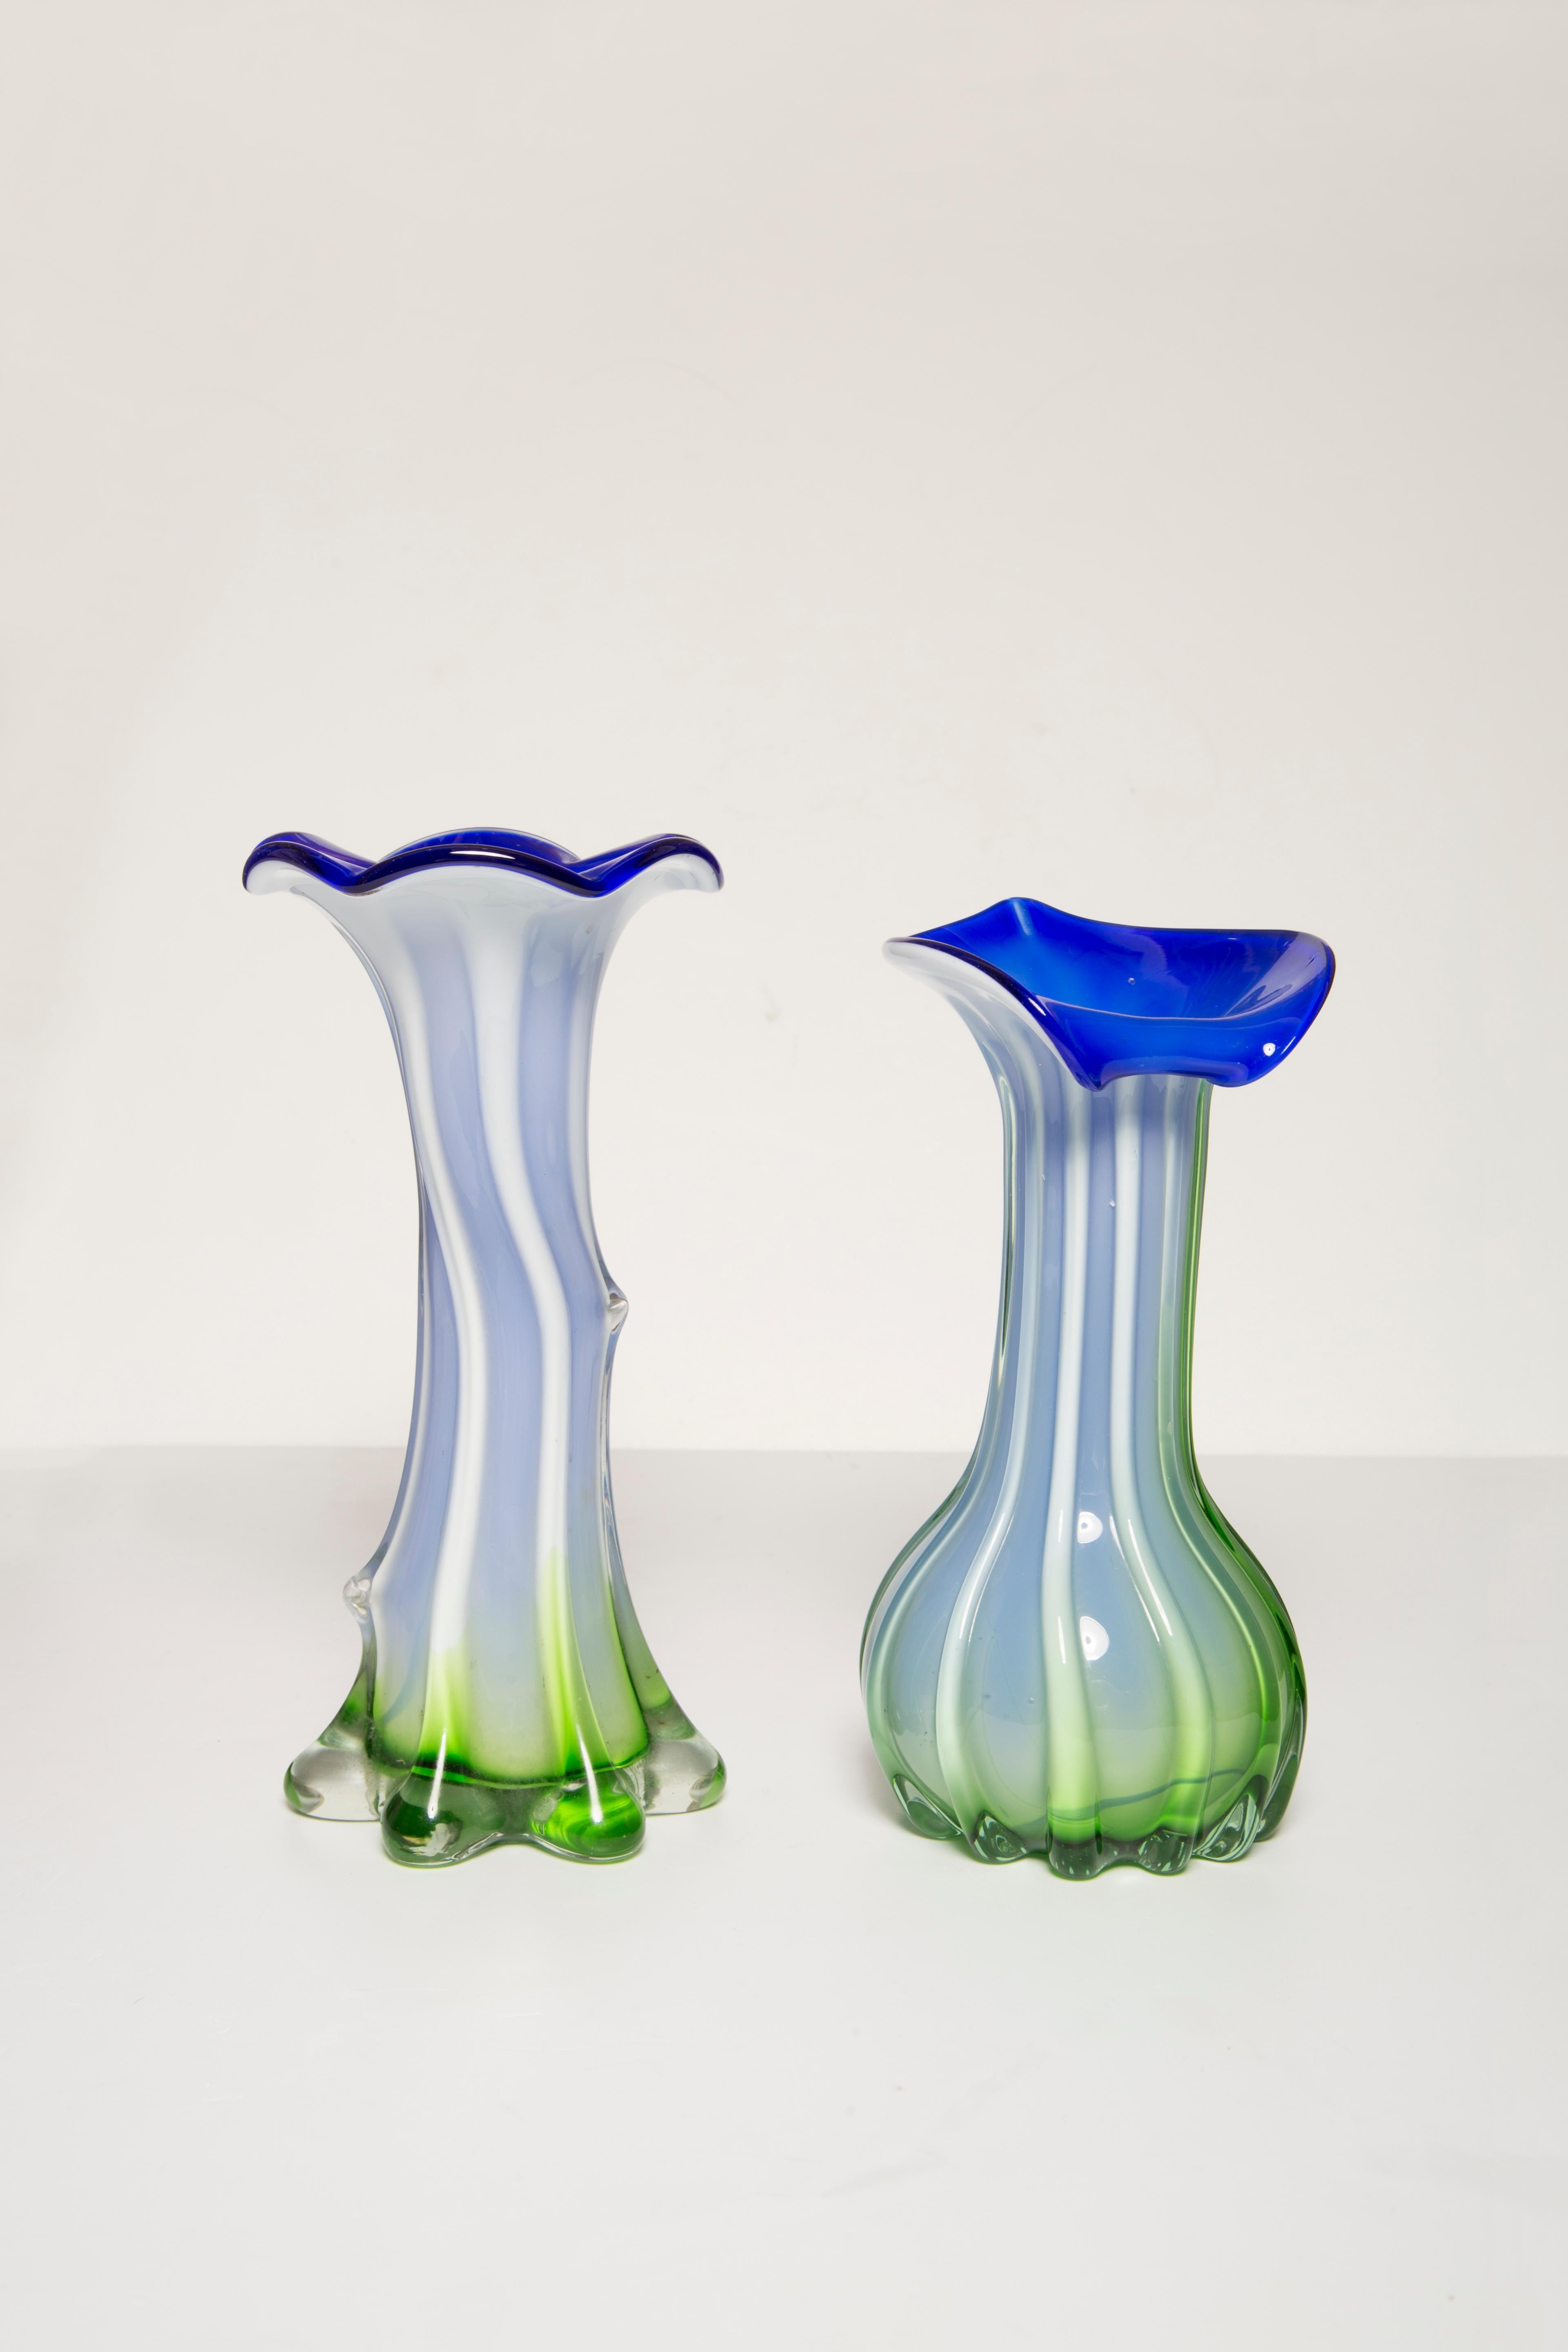 20th Century Set of Two Midcentury Vintage Green and Blue Murano Vases, Italy, 1960s For Sale